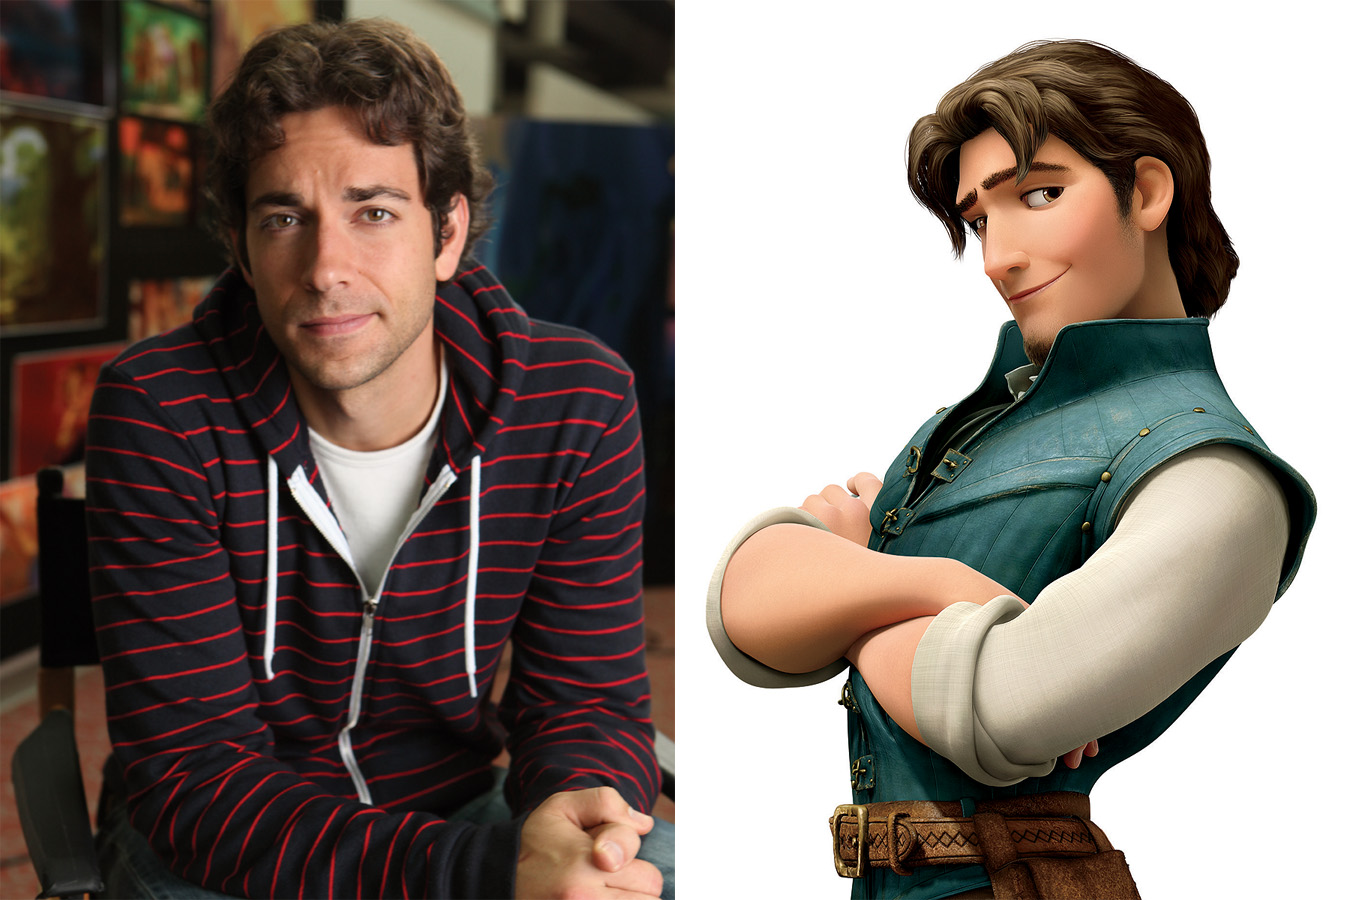 Zachary Levi as Flynn Rider in Tangled.